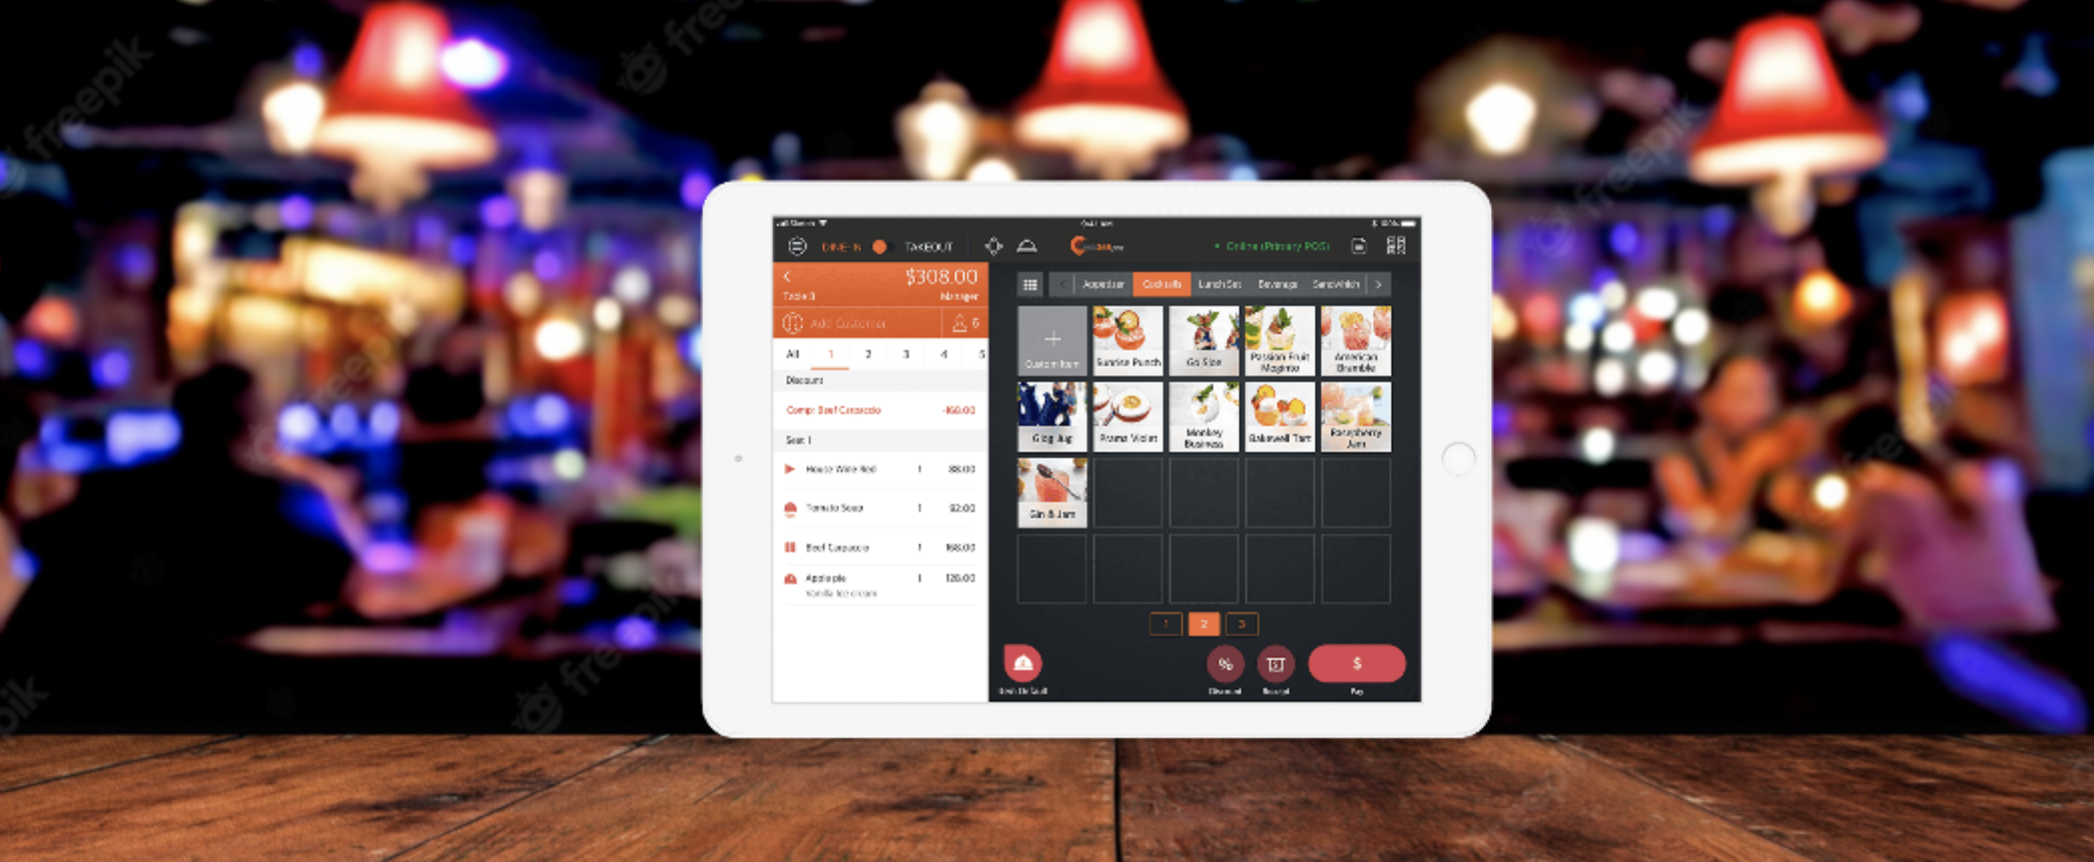 10 Useful Features a Bar POS Must Have to Help You Boost Sales